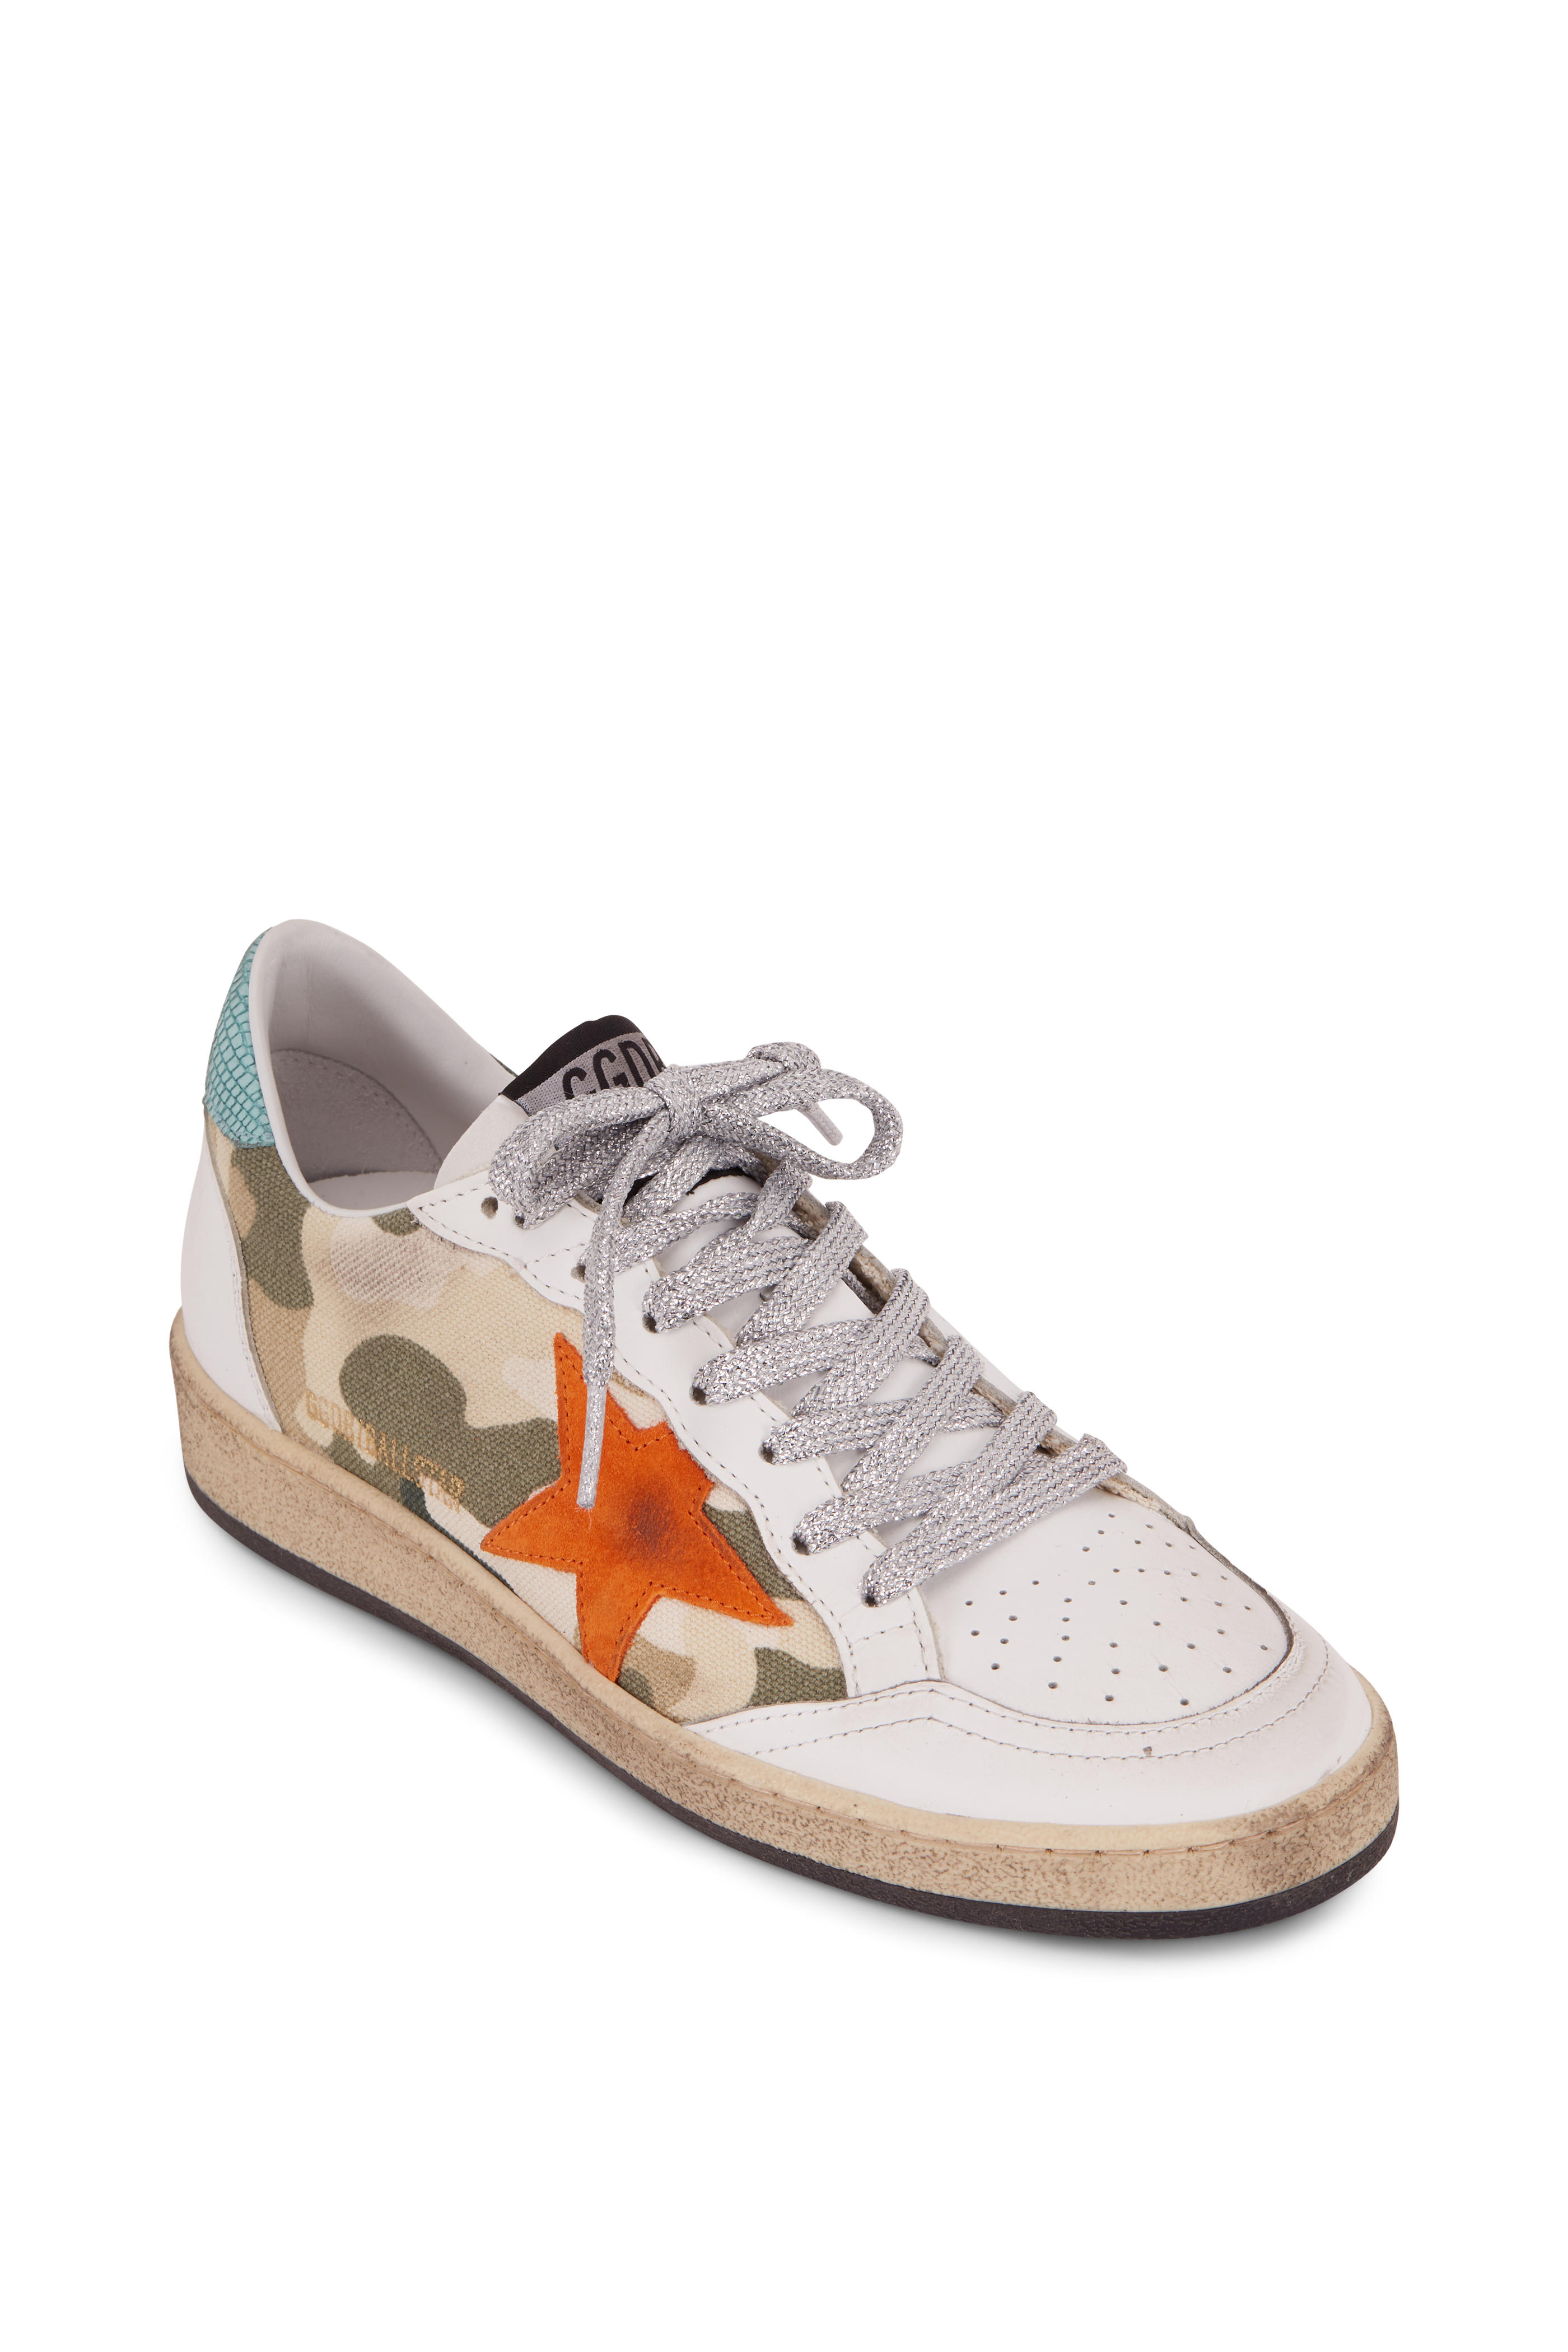 gold star canvas shoes